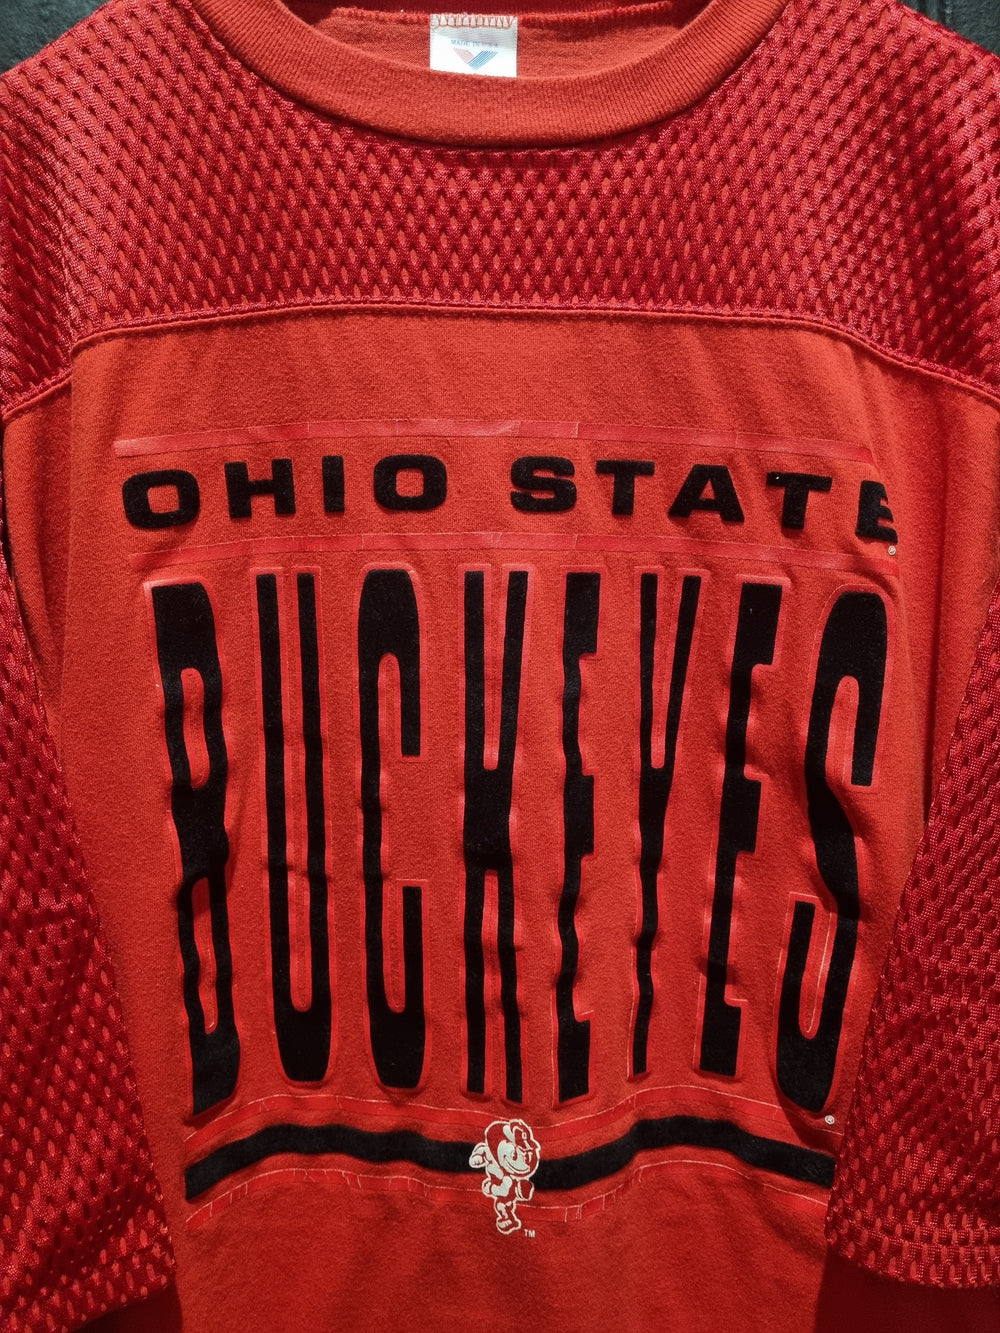 Ohio State Buckeyes Jersey Tee Made in USA Large